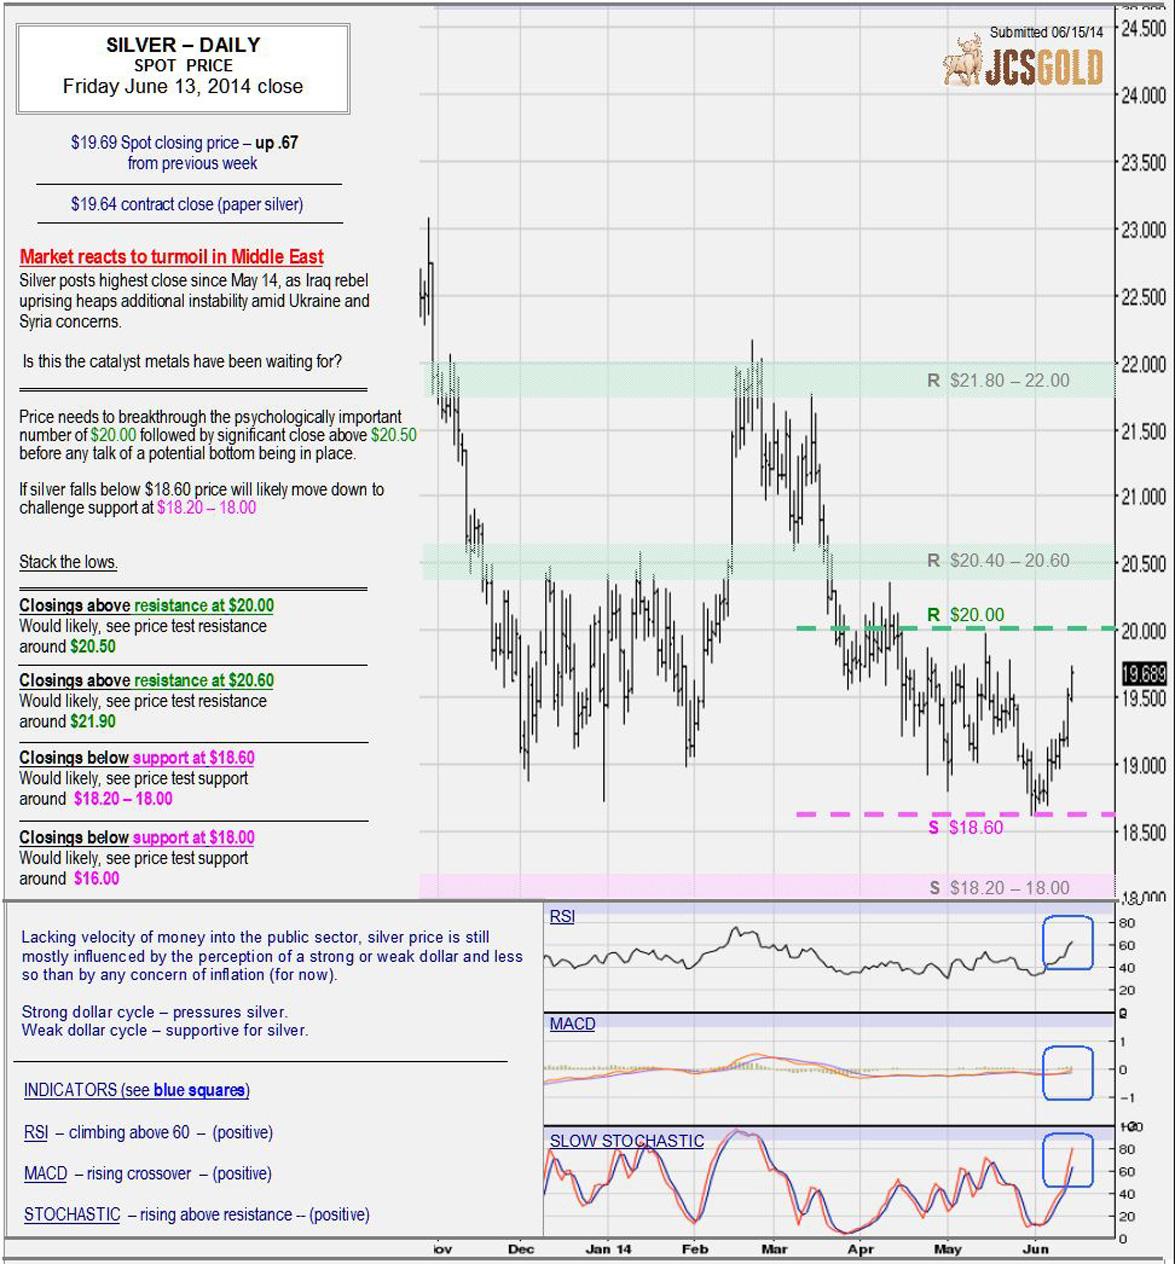 June 13, 2014 chart & commentary